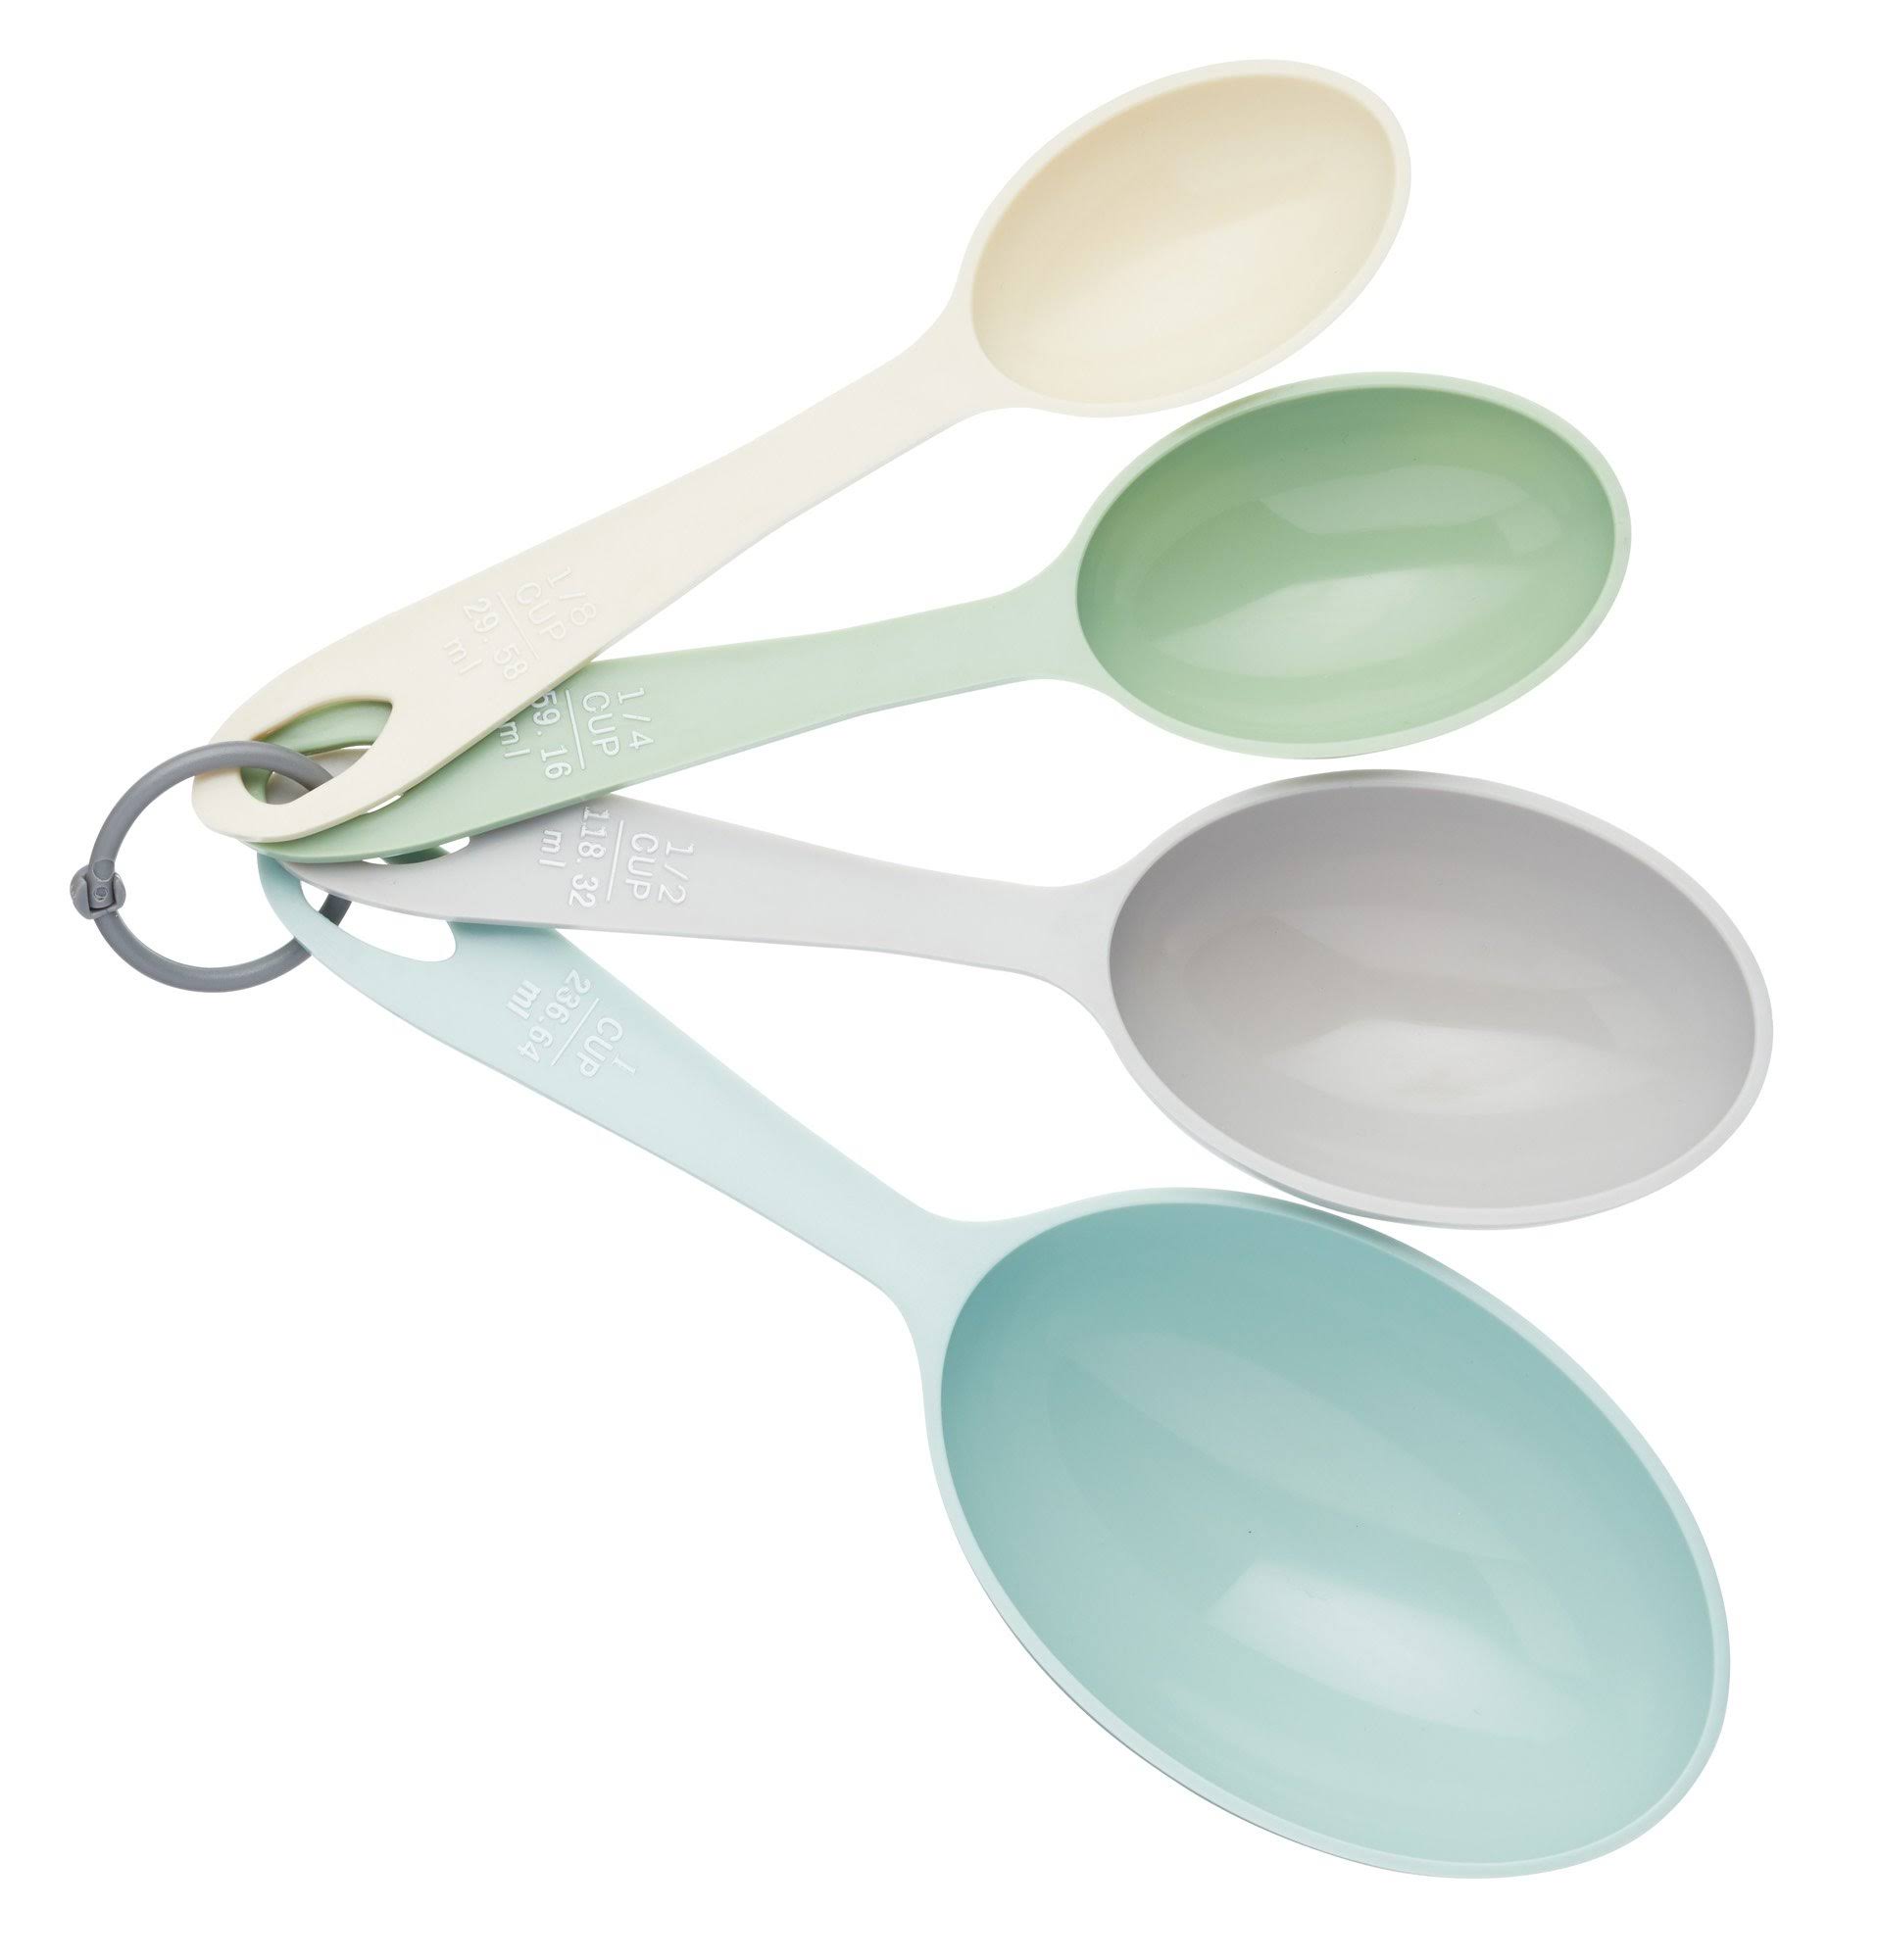 Colourworks KitchenCraft Scoop-Shaped Plastic Measuring Cups - 'Classics' Colours (Set of 4)